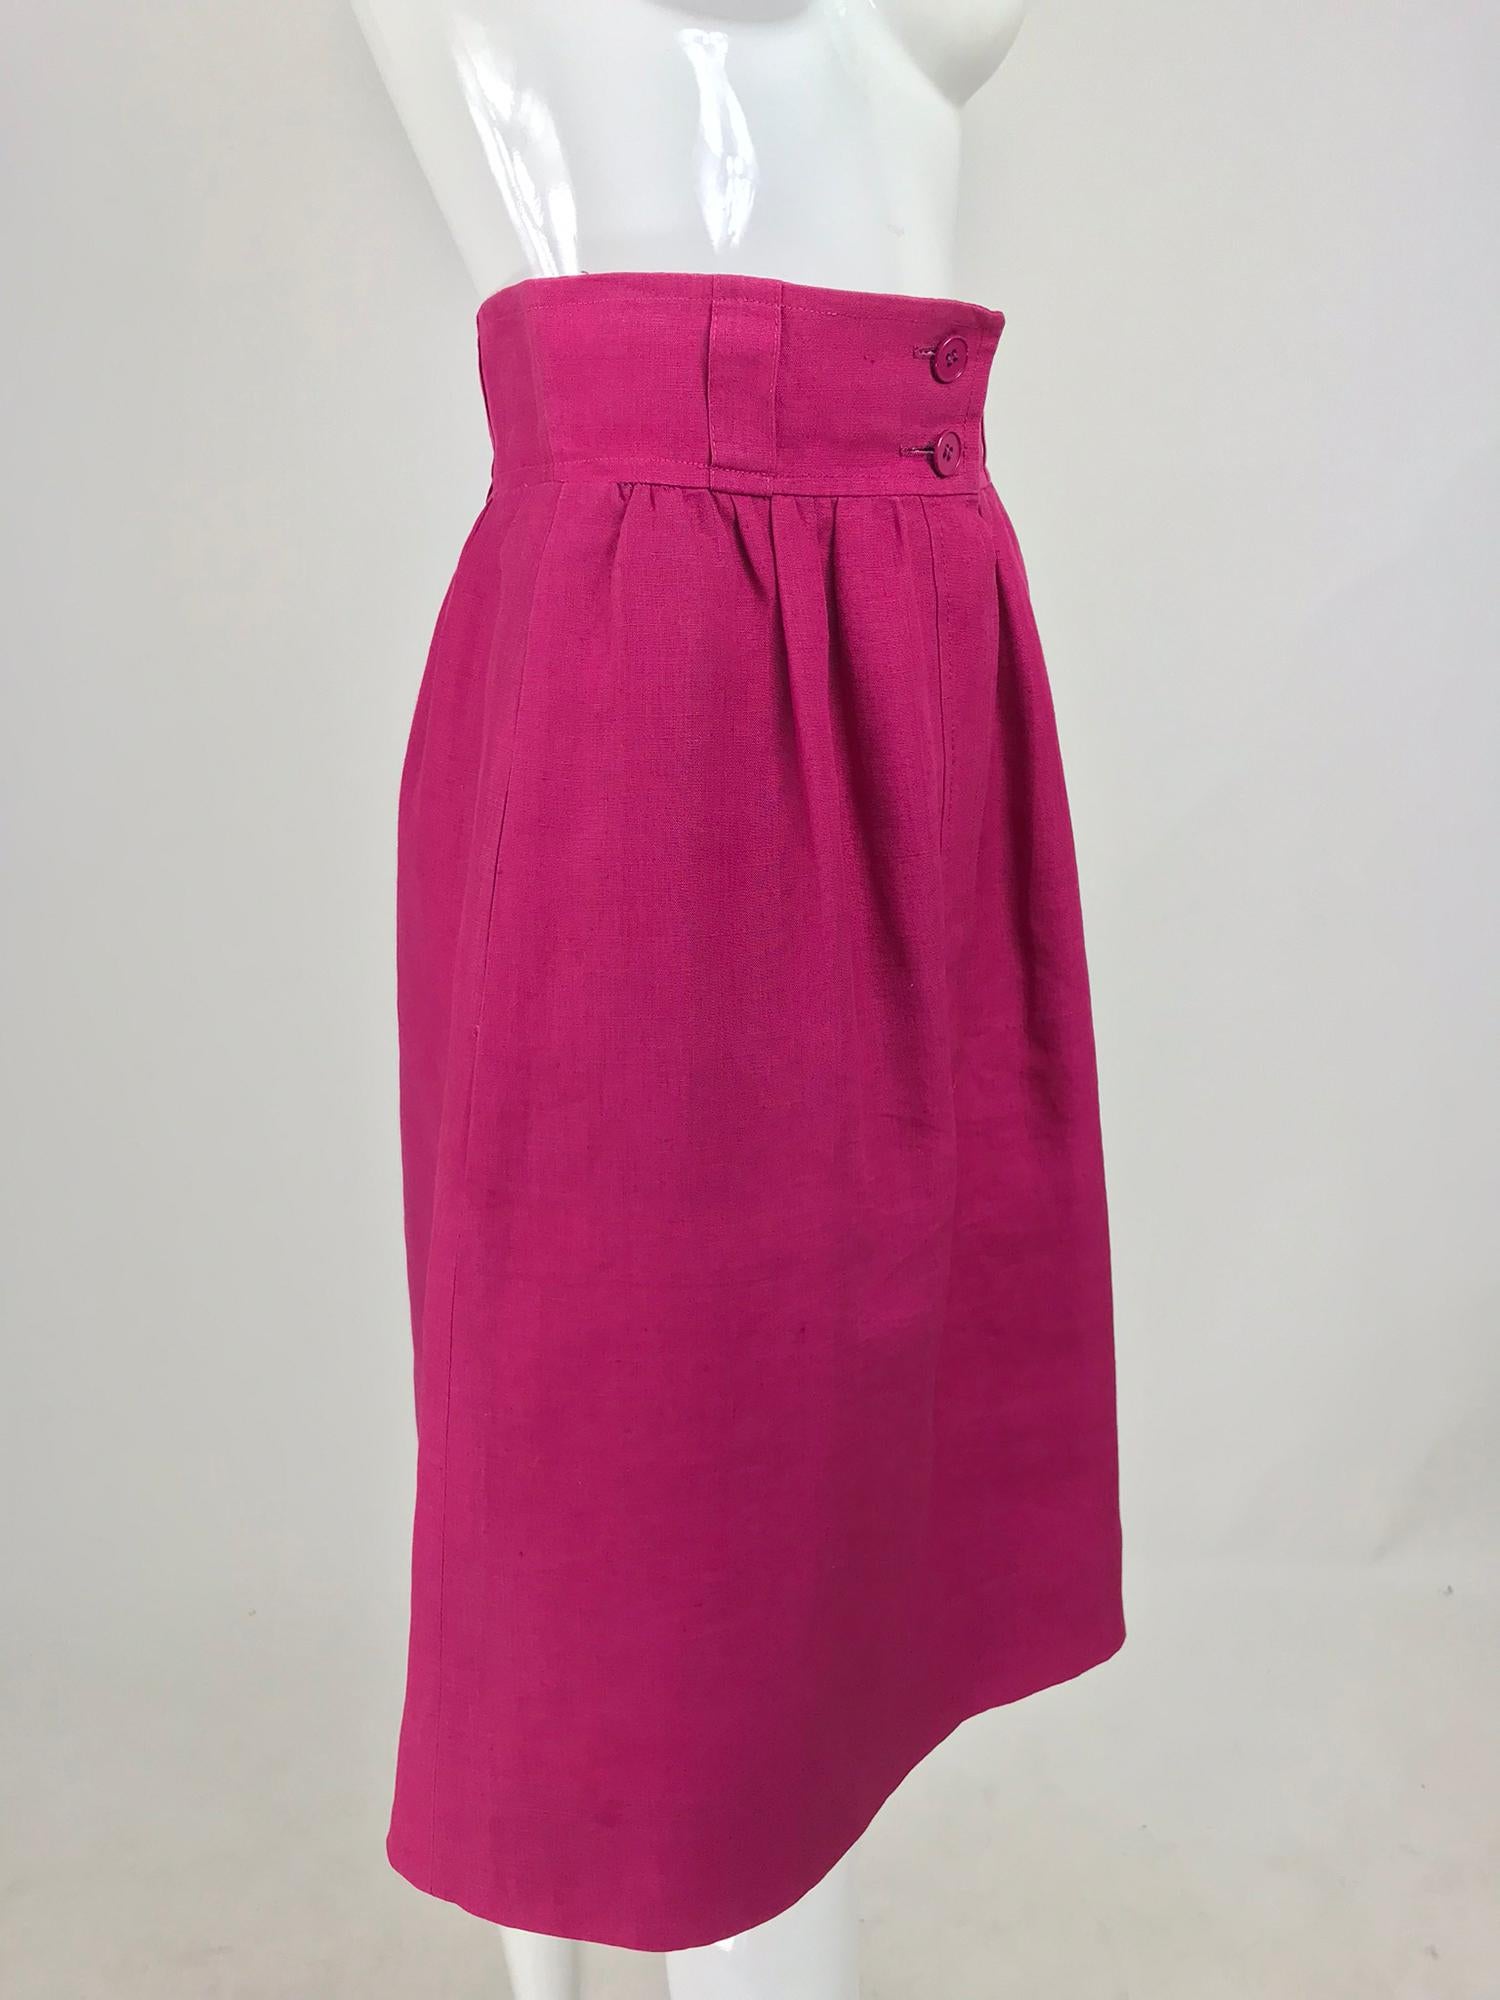 Givenchy Hot Pink Linen Skirt 1980s In Good Condition In West Palm Beach, FL